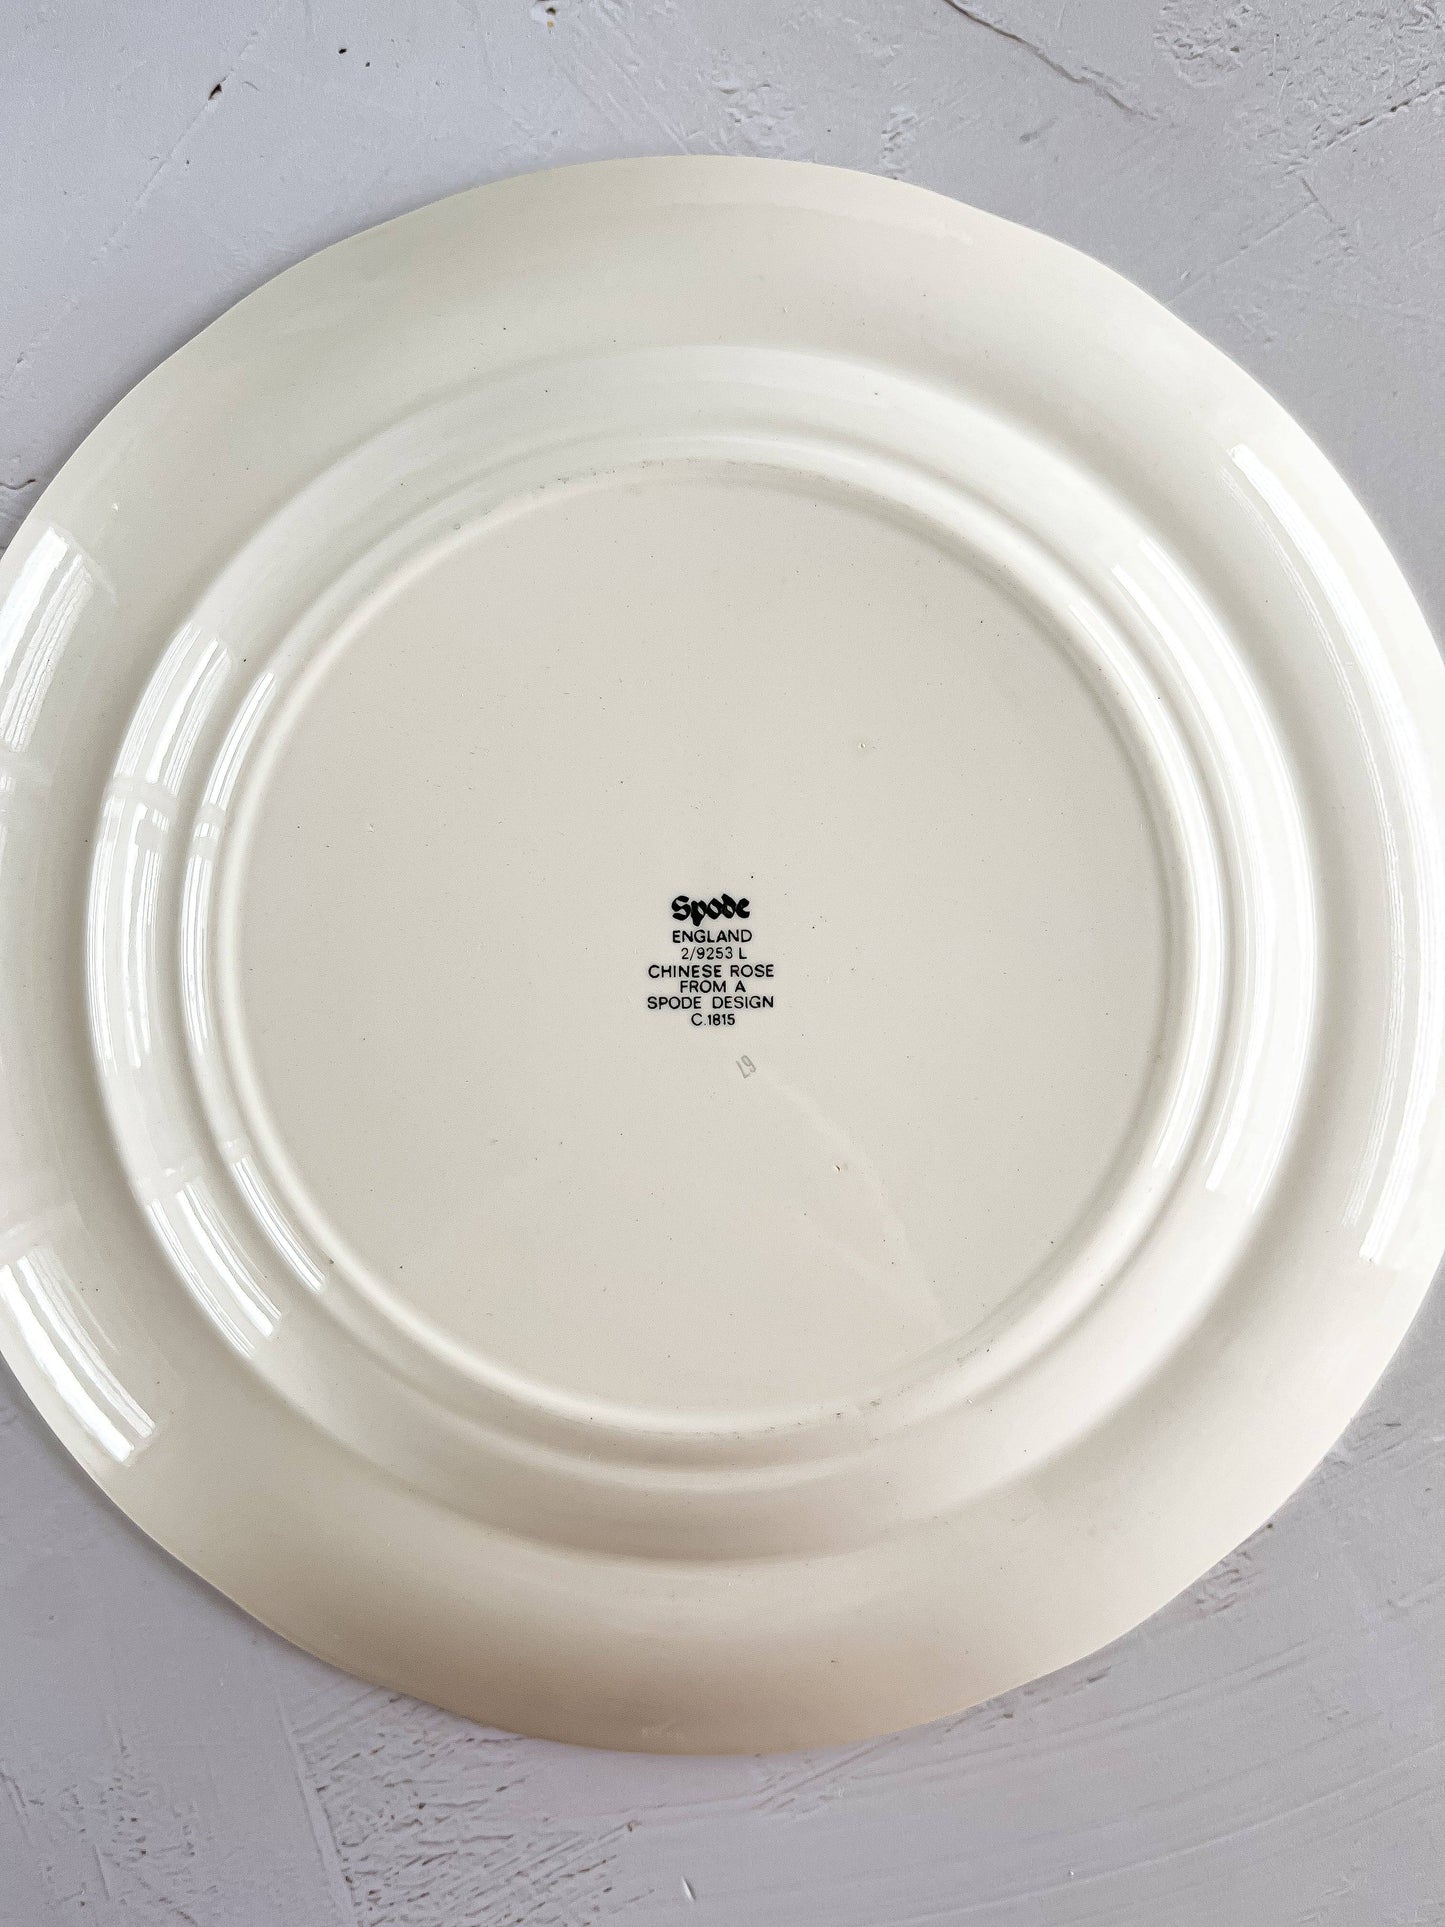 Spode Set of 6 Luncheon Plates - 'Chinese Rose' Collection - SOSC Home